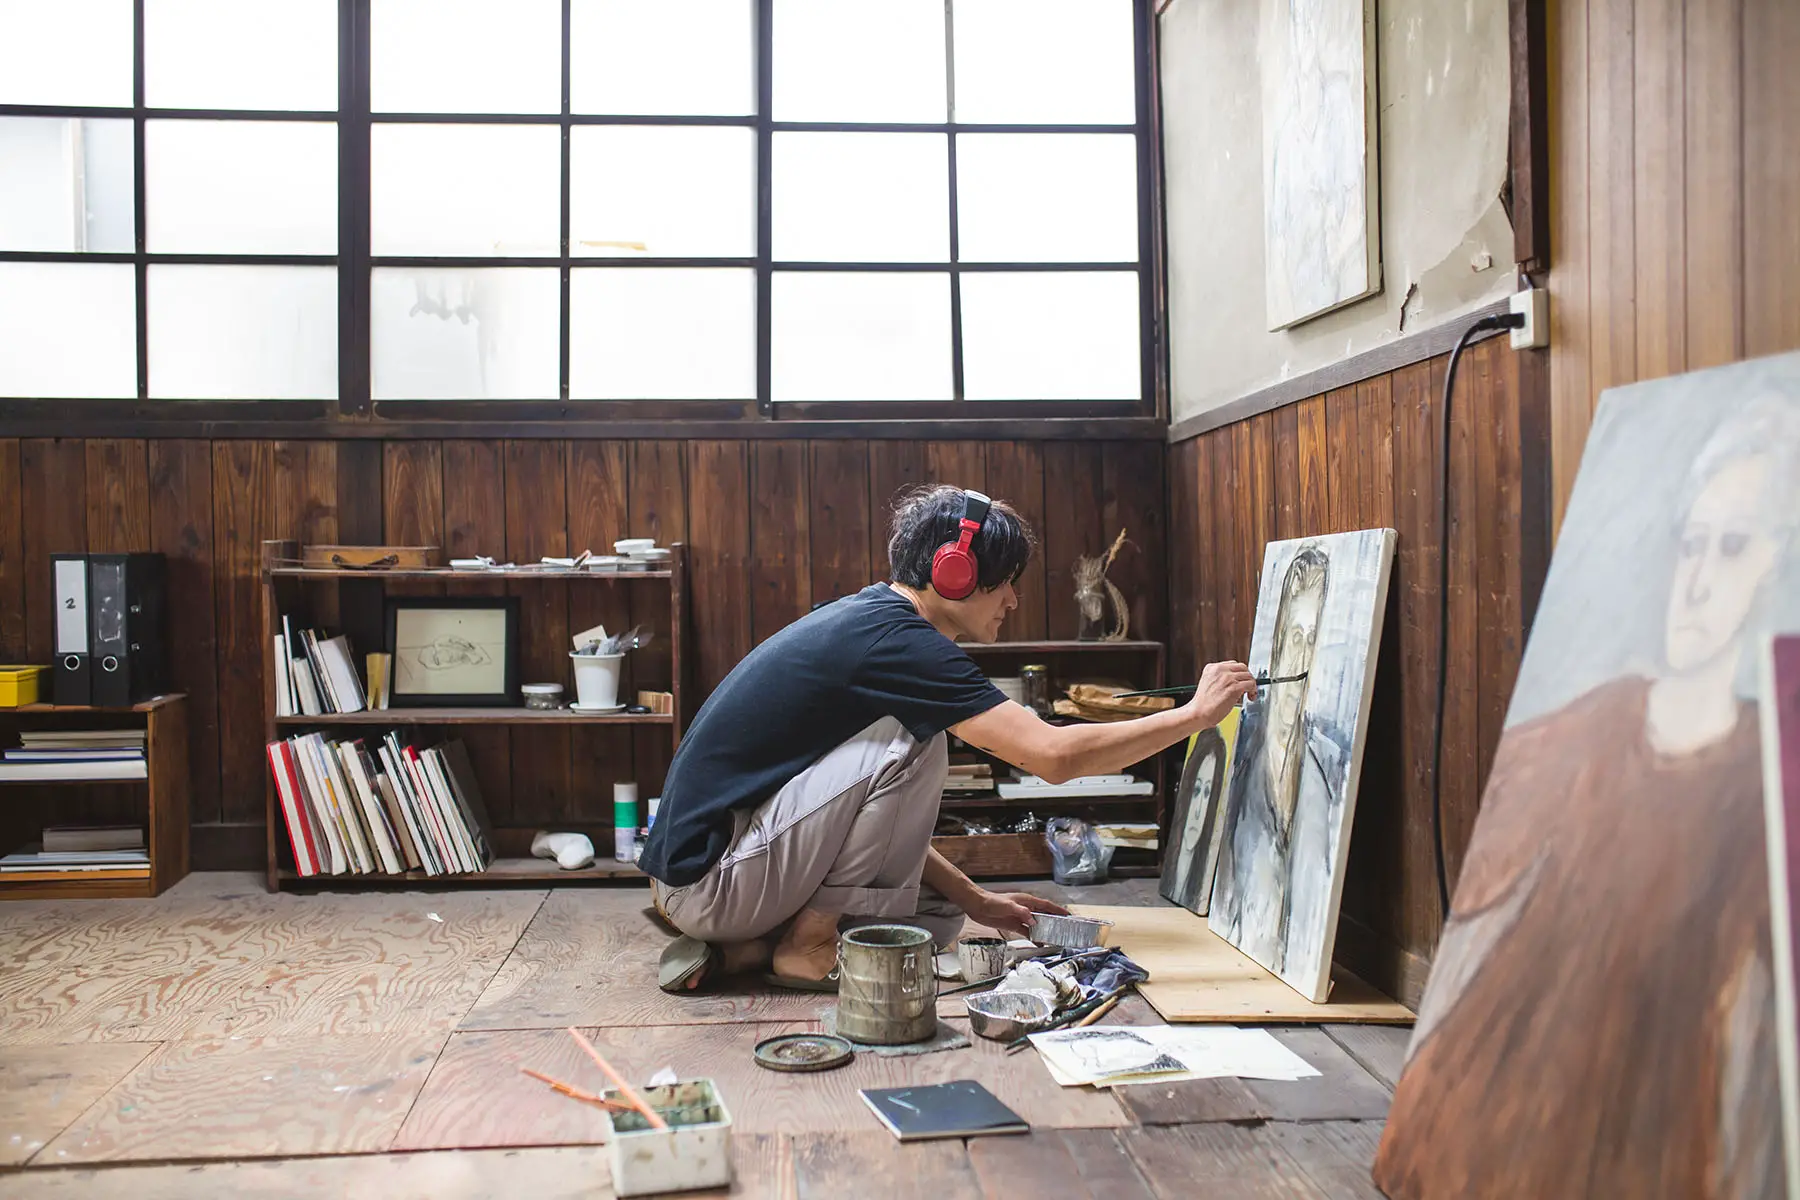 Man sitting on the floor painting with oil paint in his studio, listening to something on his headphones.